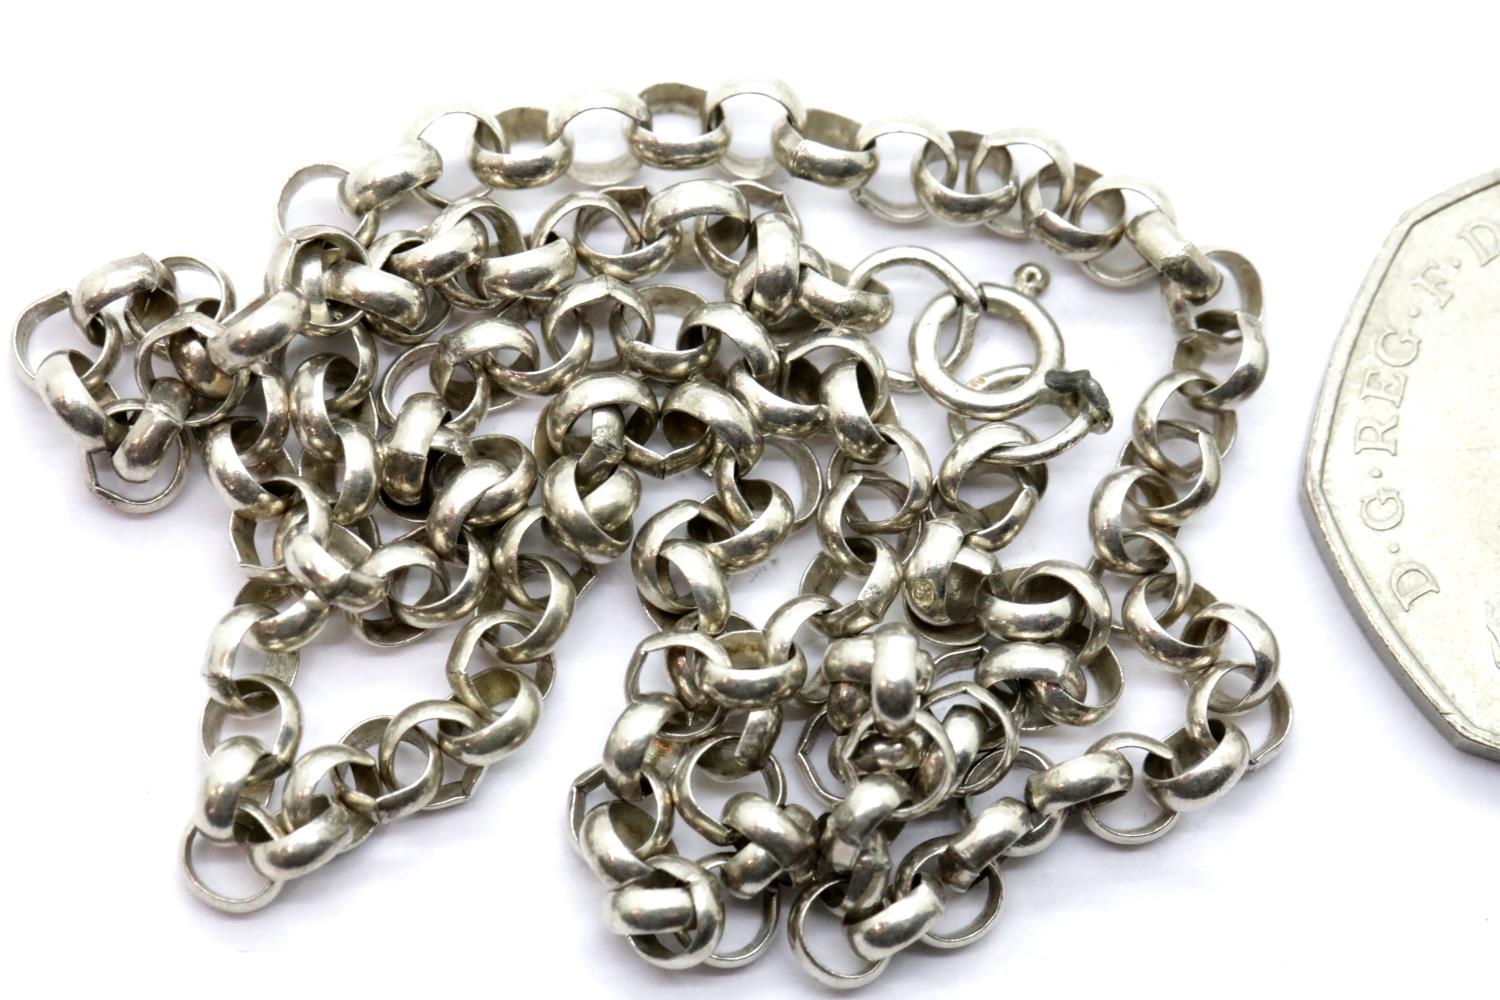 Silver 18" neck chain. P&P Group 1 (£14+VAT for the first lot and £1+VAT for subsequent lots)